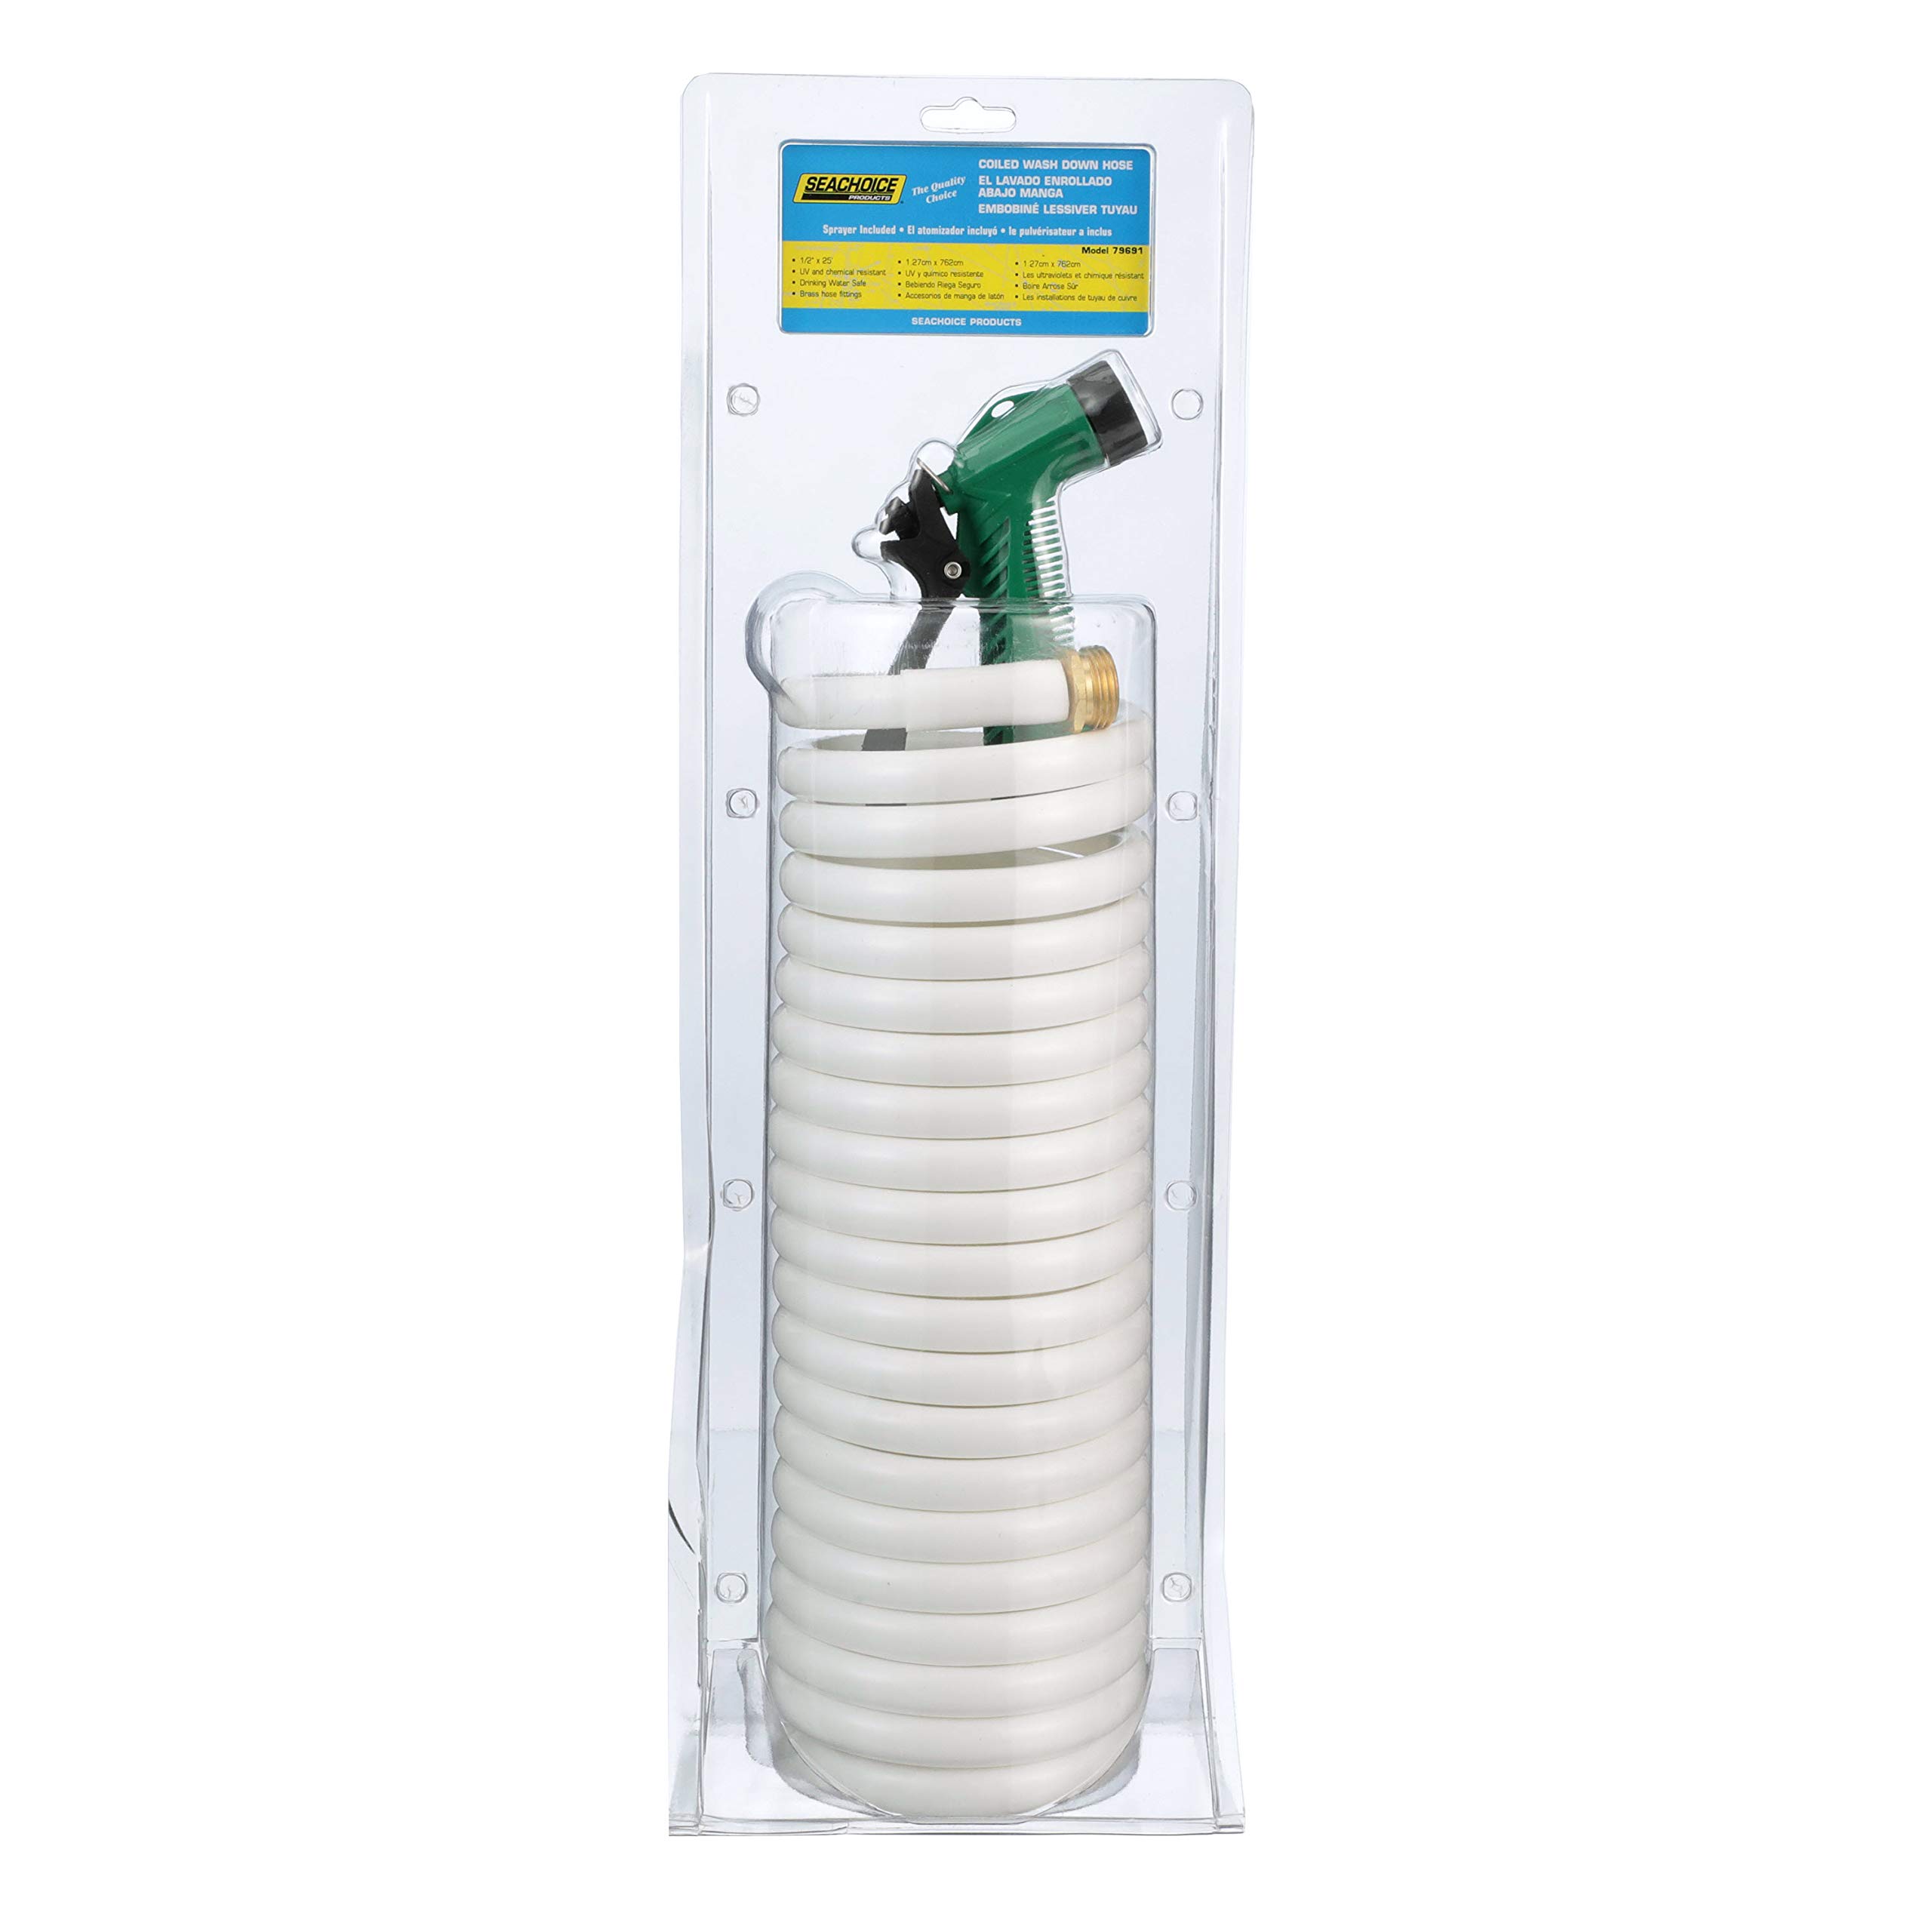 Seachoice Coiled Washdown Hose w/ Sprayer and Brass Fittings, 25 Ft., White